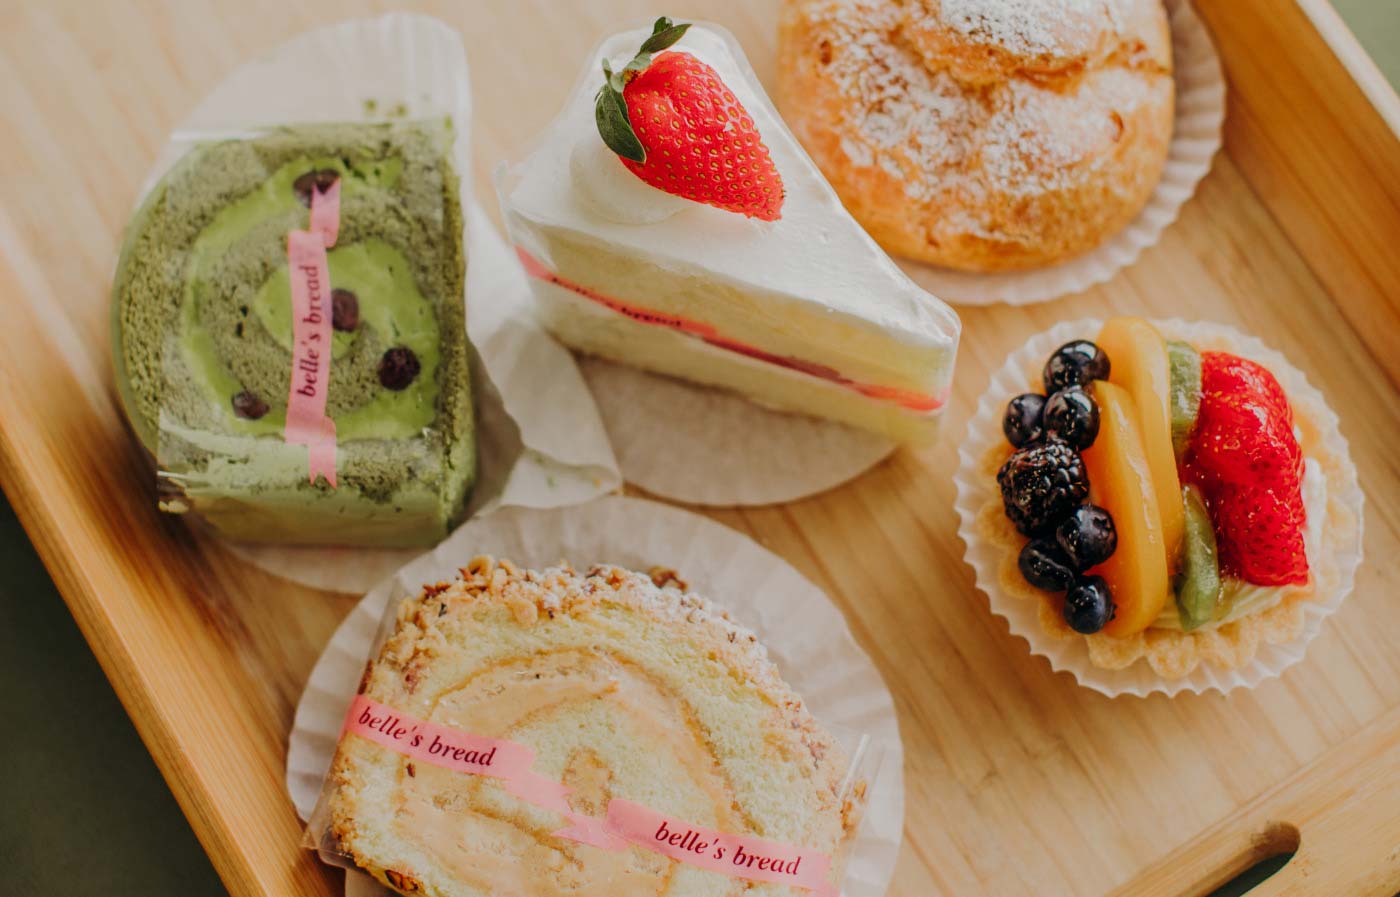 Matcha roll, strawberry cake and custard-filled fruit tarts are among the menu items.